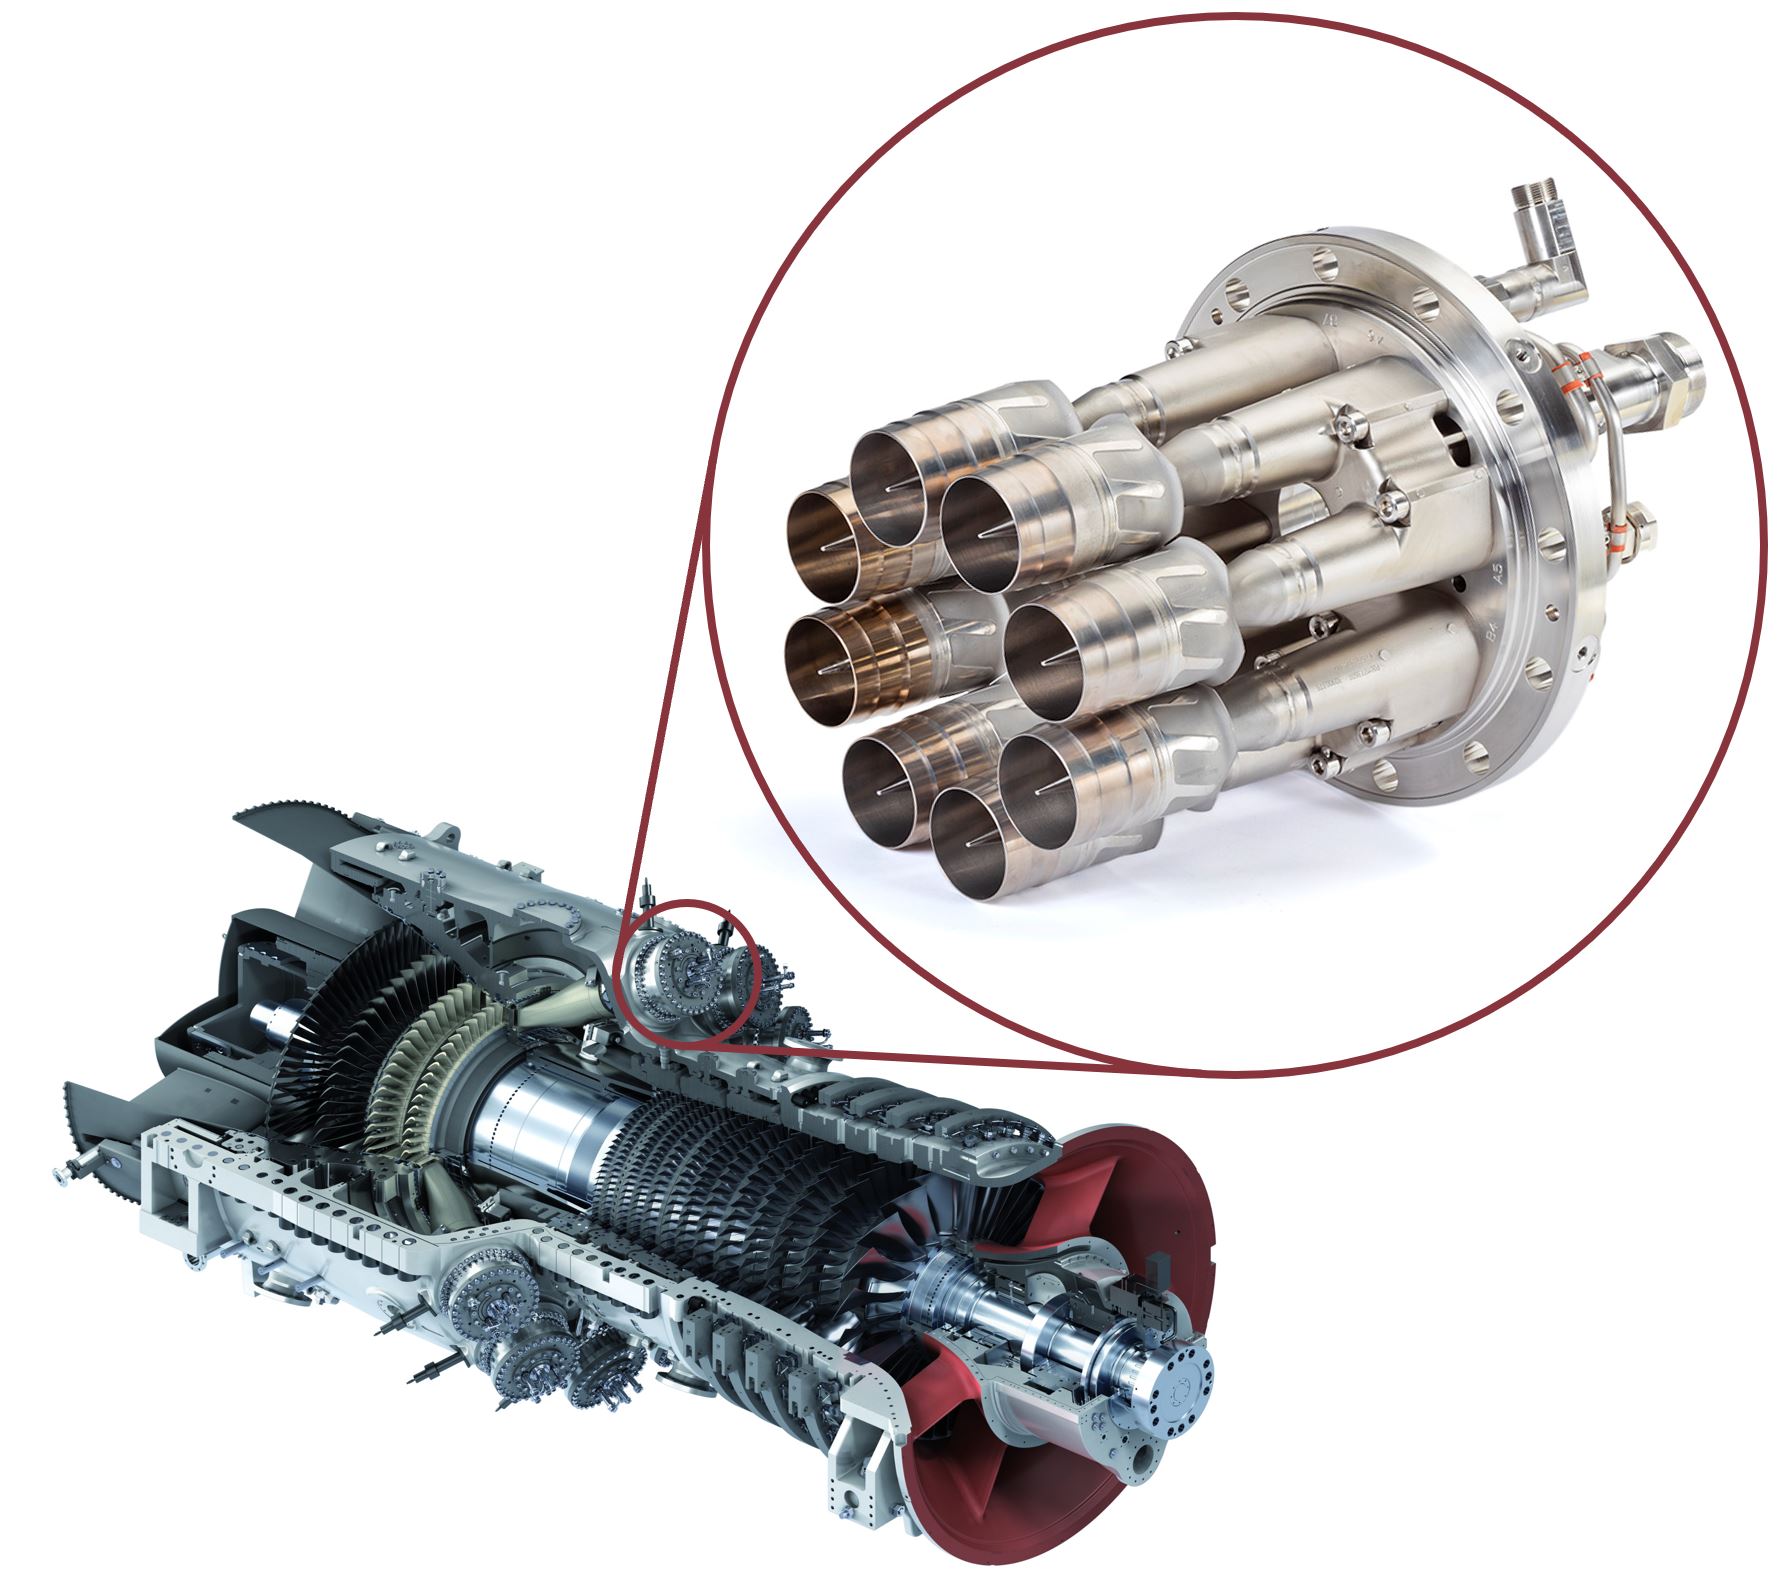 Fig. 1 Swirlers and burner assembly and their location in the gas turbine (Courtesy Siemens)